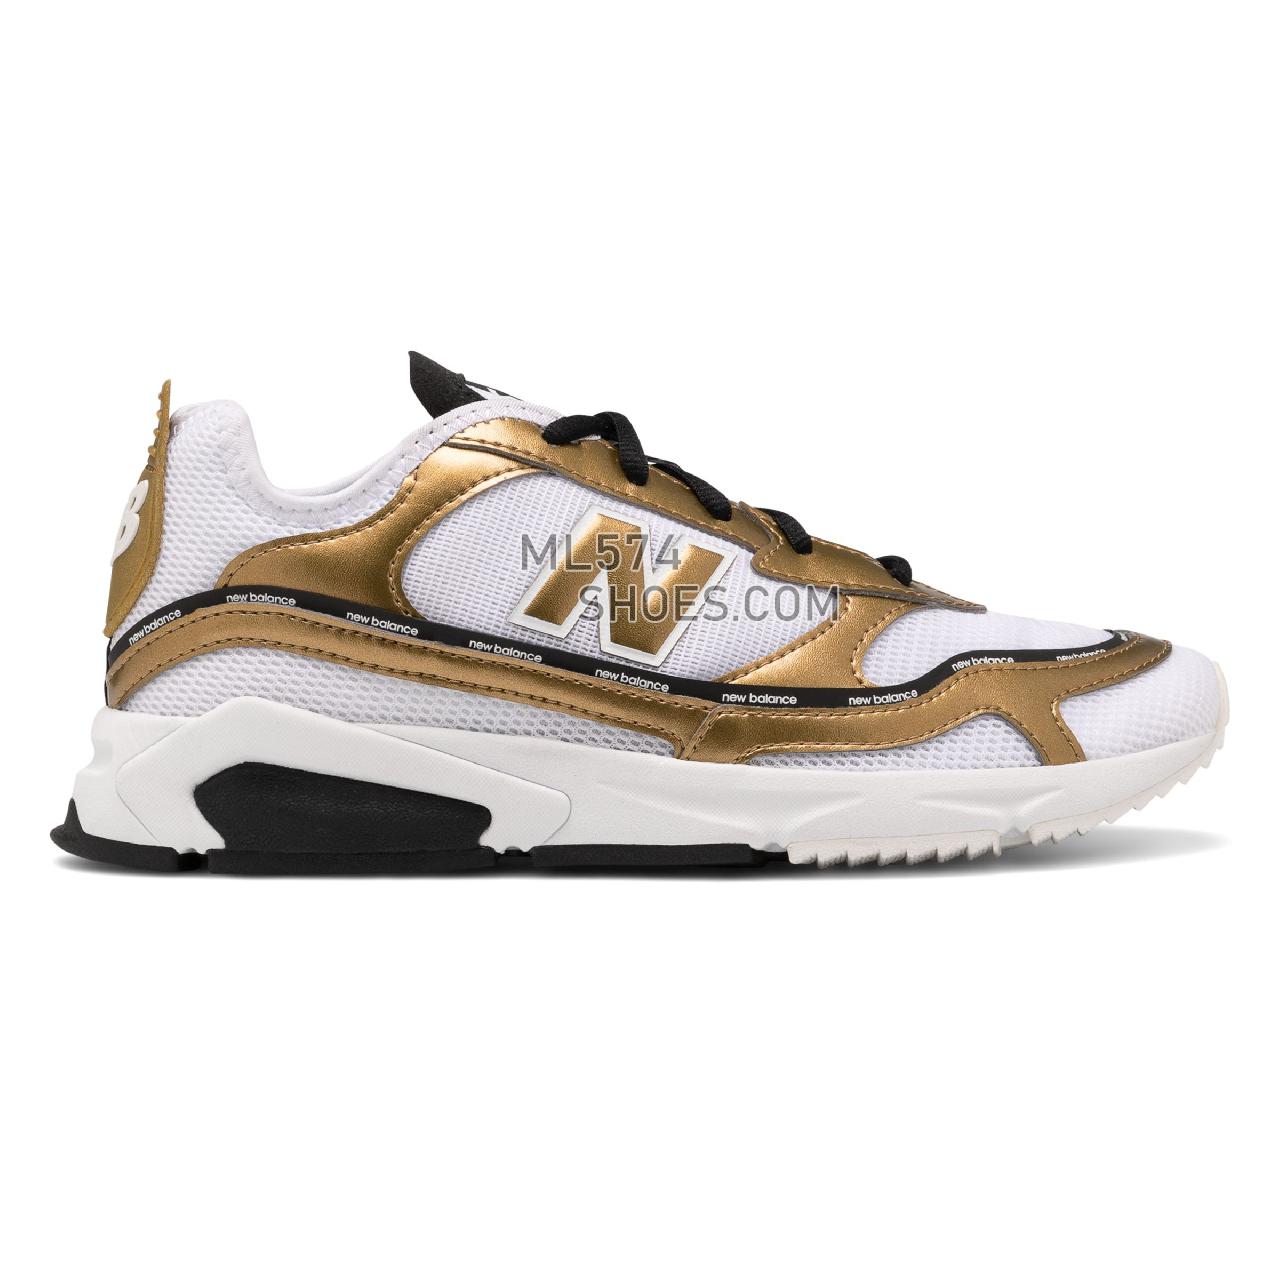 New Balance X-Racer - Women's Sport Style Sneakers - Munsell White with Gold Metallic - WSXRCHLD